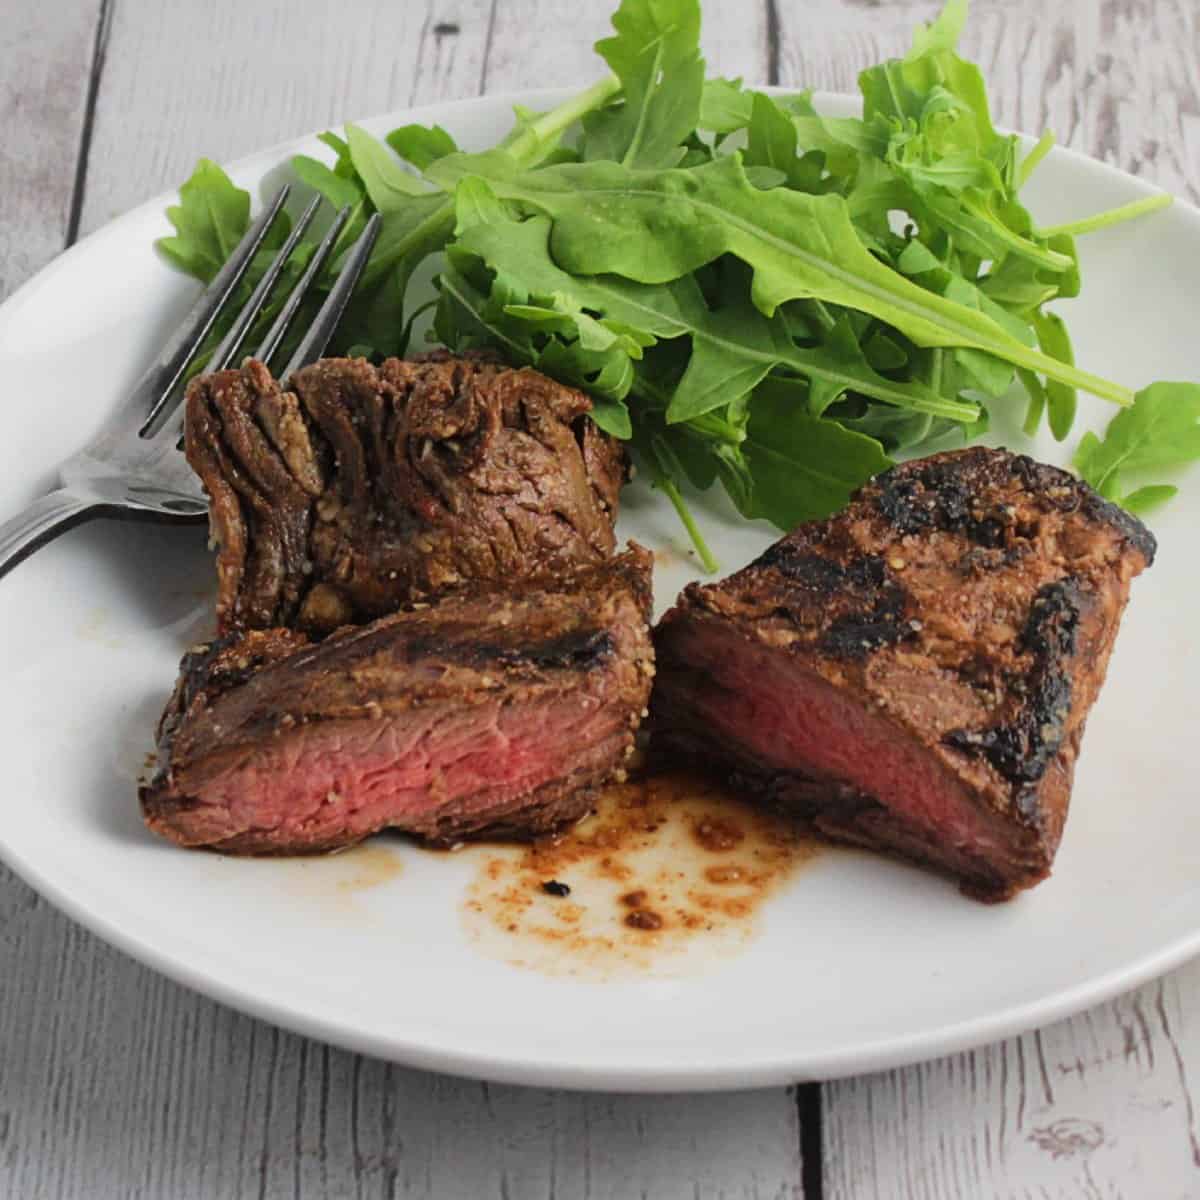 grilled steak tips sliced in half and served on a white plate with baby arugula.